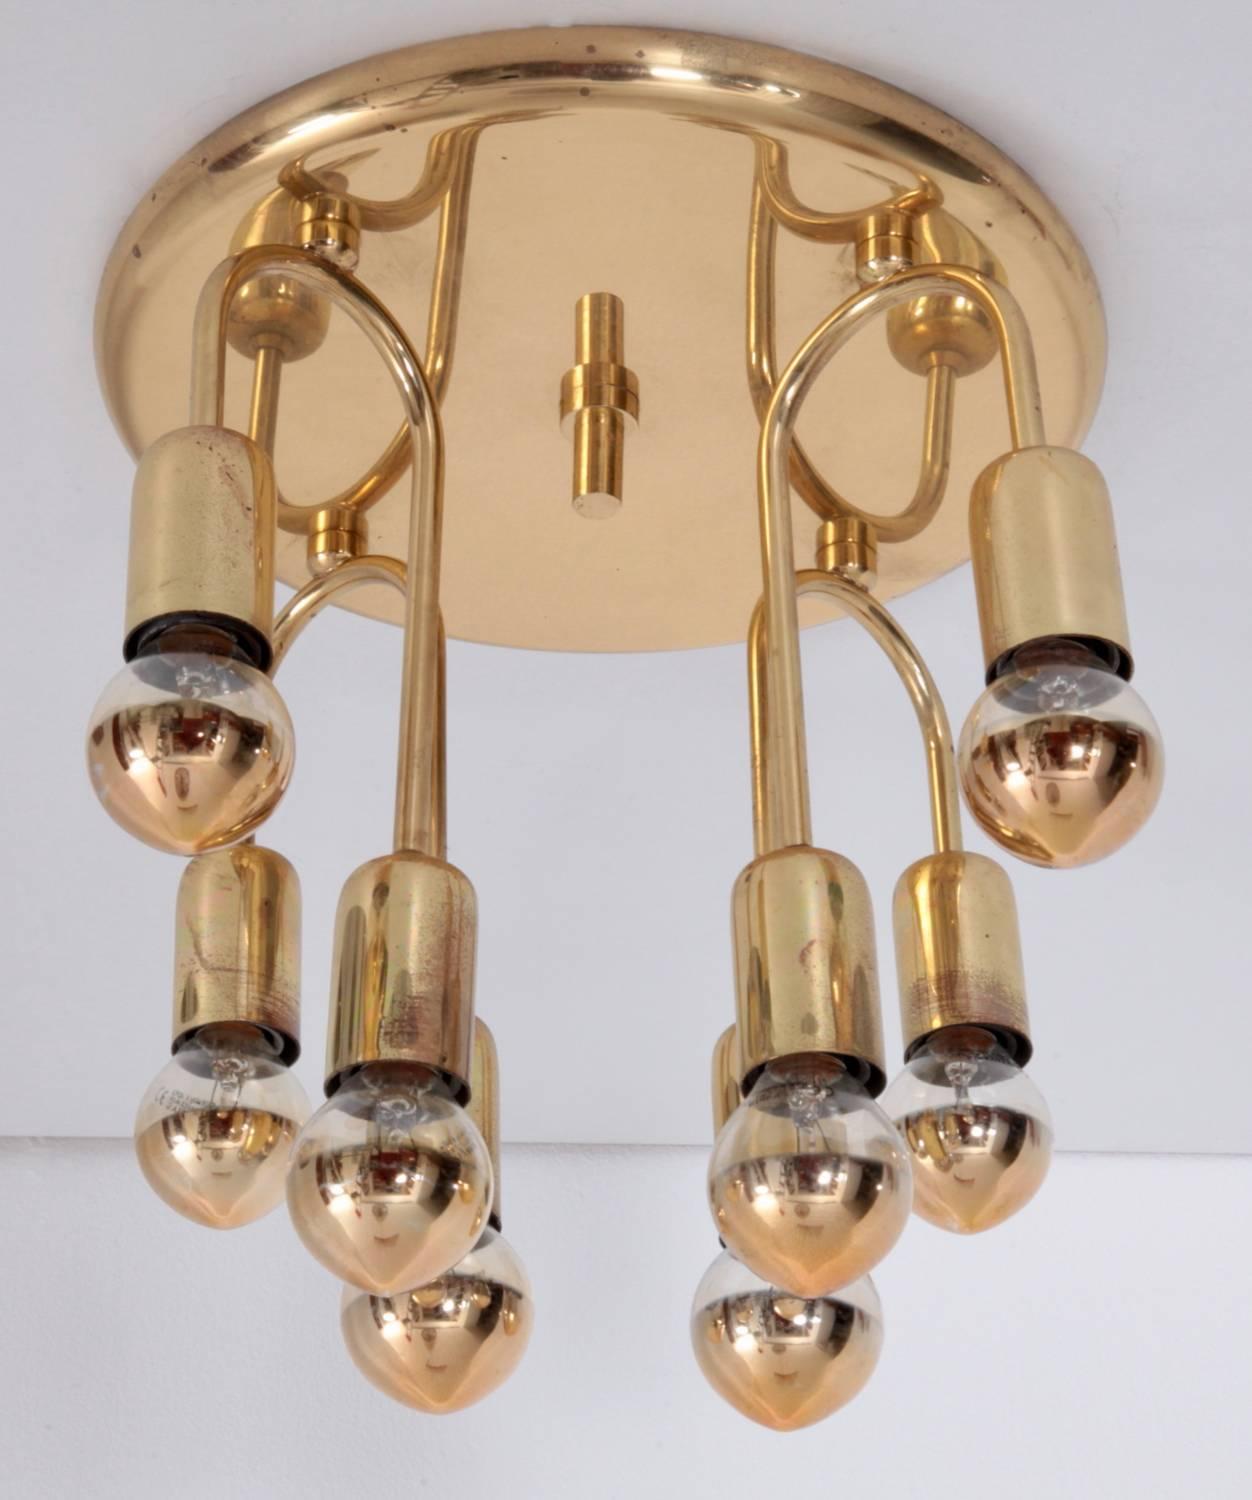 Rare Honsel flush mount ceiling lamps in excellent condition. Eight x E14 bulbs each lamp.
To be on the the safe side, the lamp should be checked locally by a specialist concerning local requirements.
